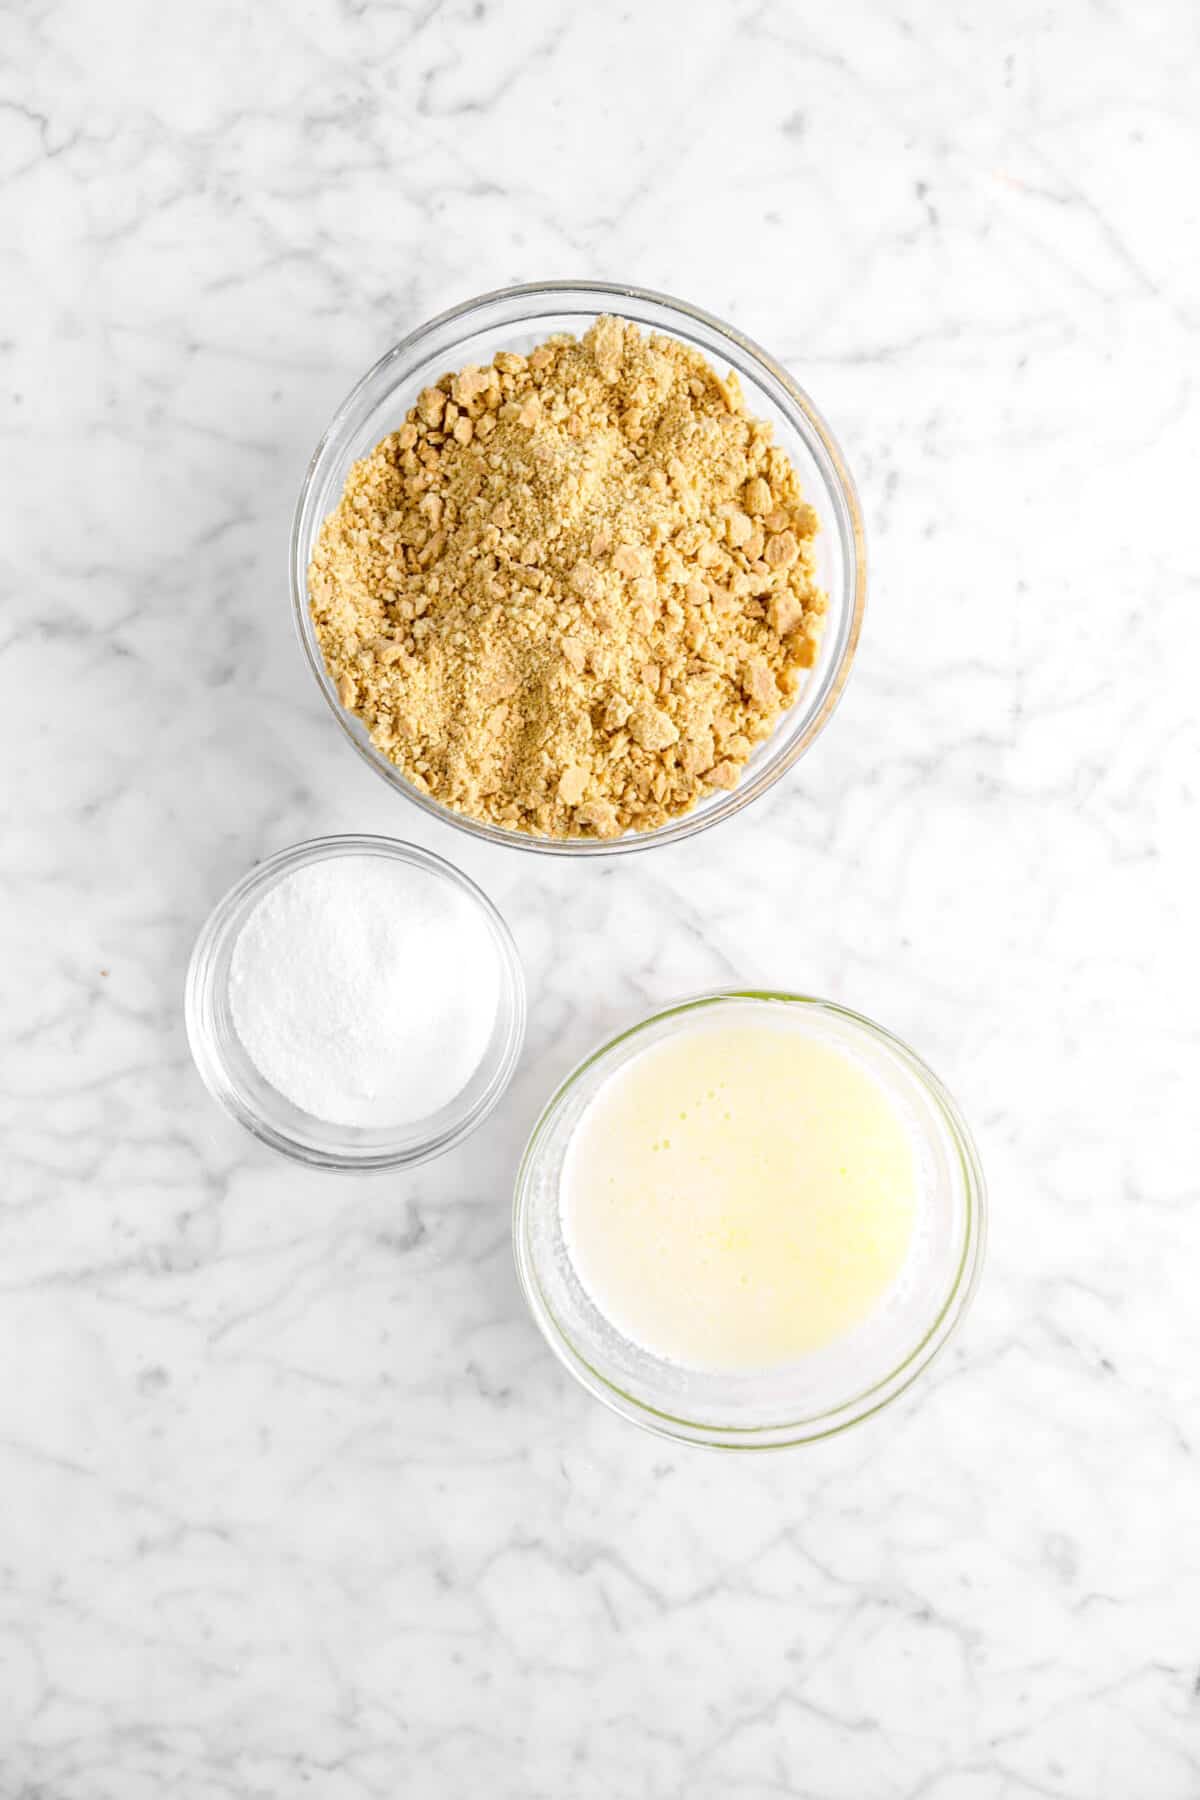 graham cracker crumbs, sugar, and melted butter in glass bowls